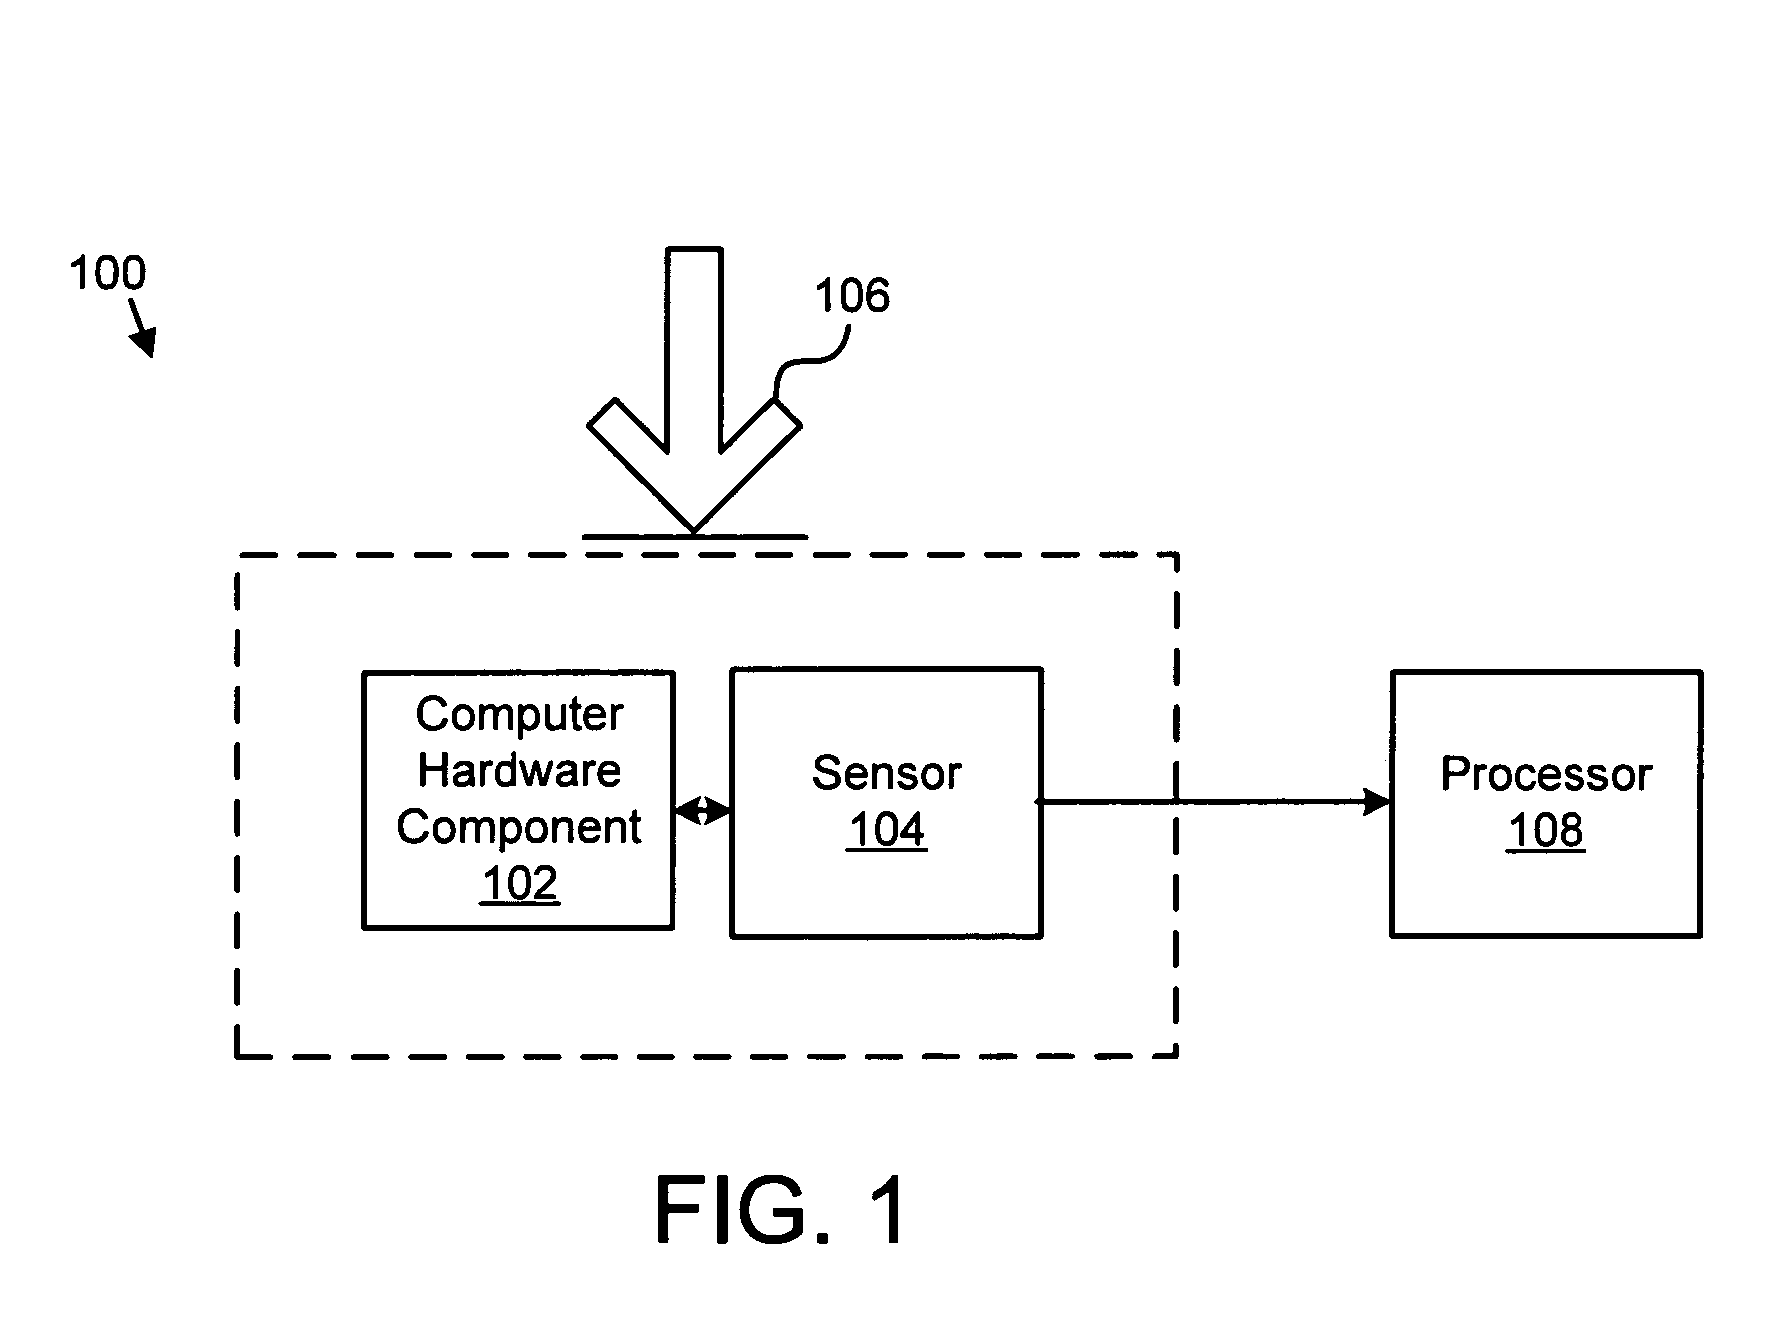 Apparatus, system, and method for identifying structural stress conditions for computer hardware